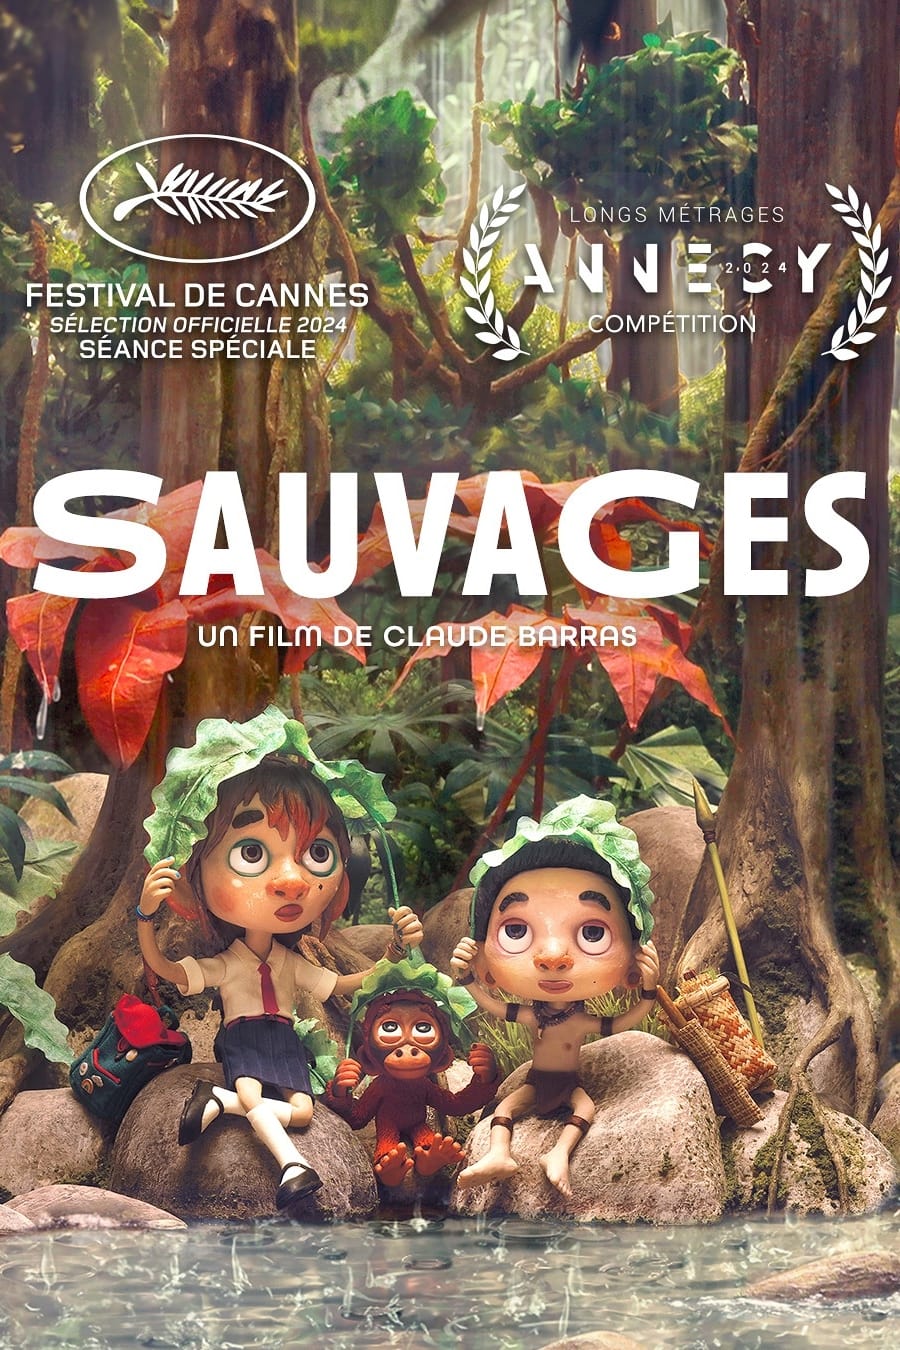 Sauvages!